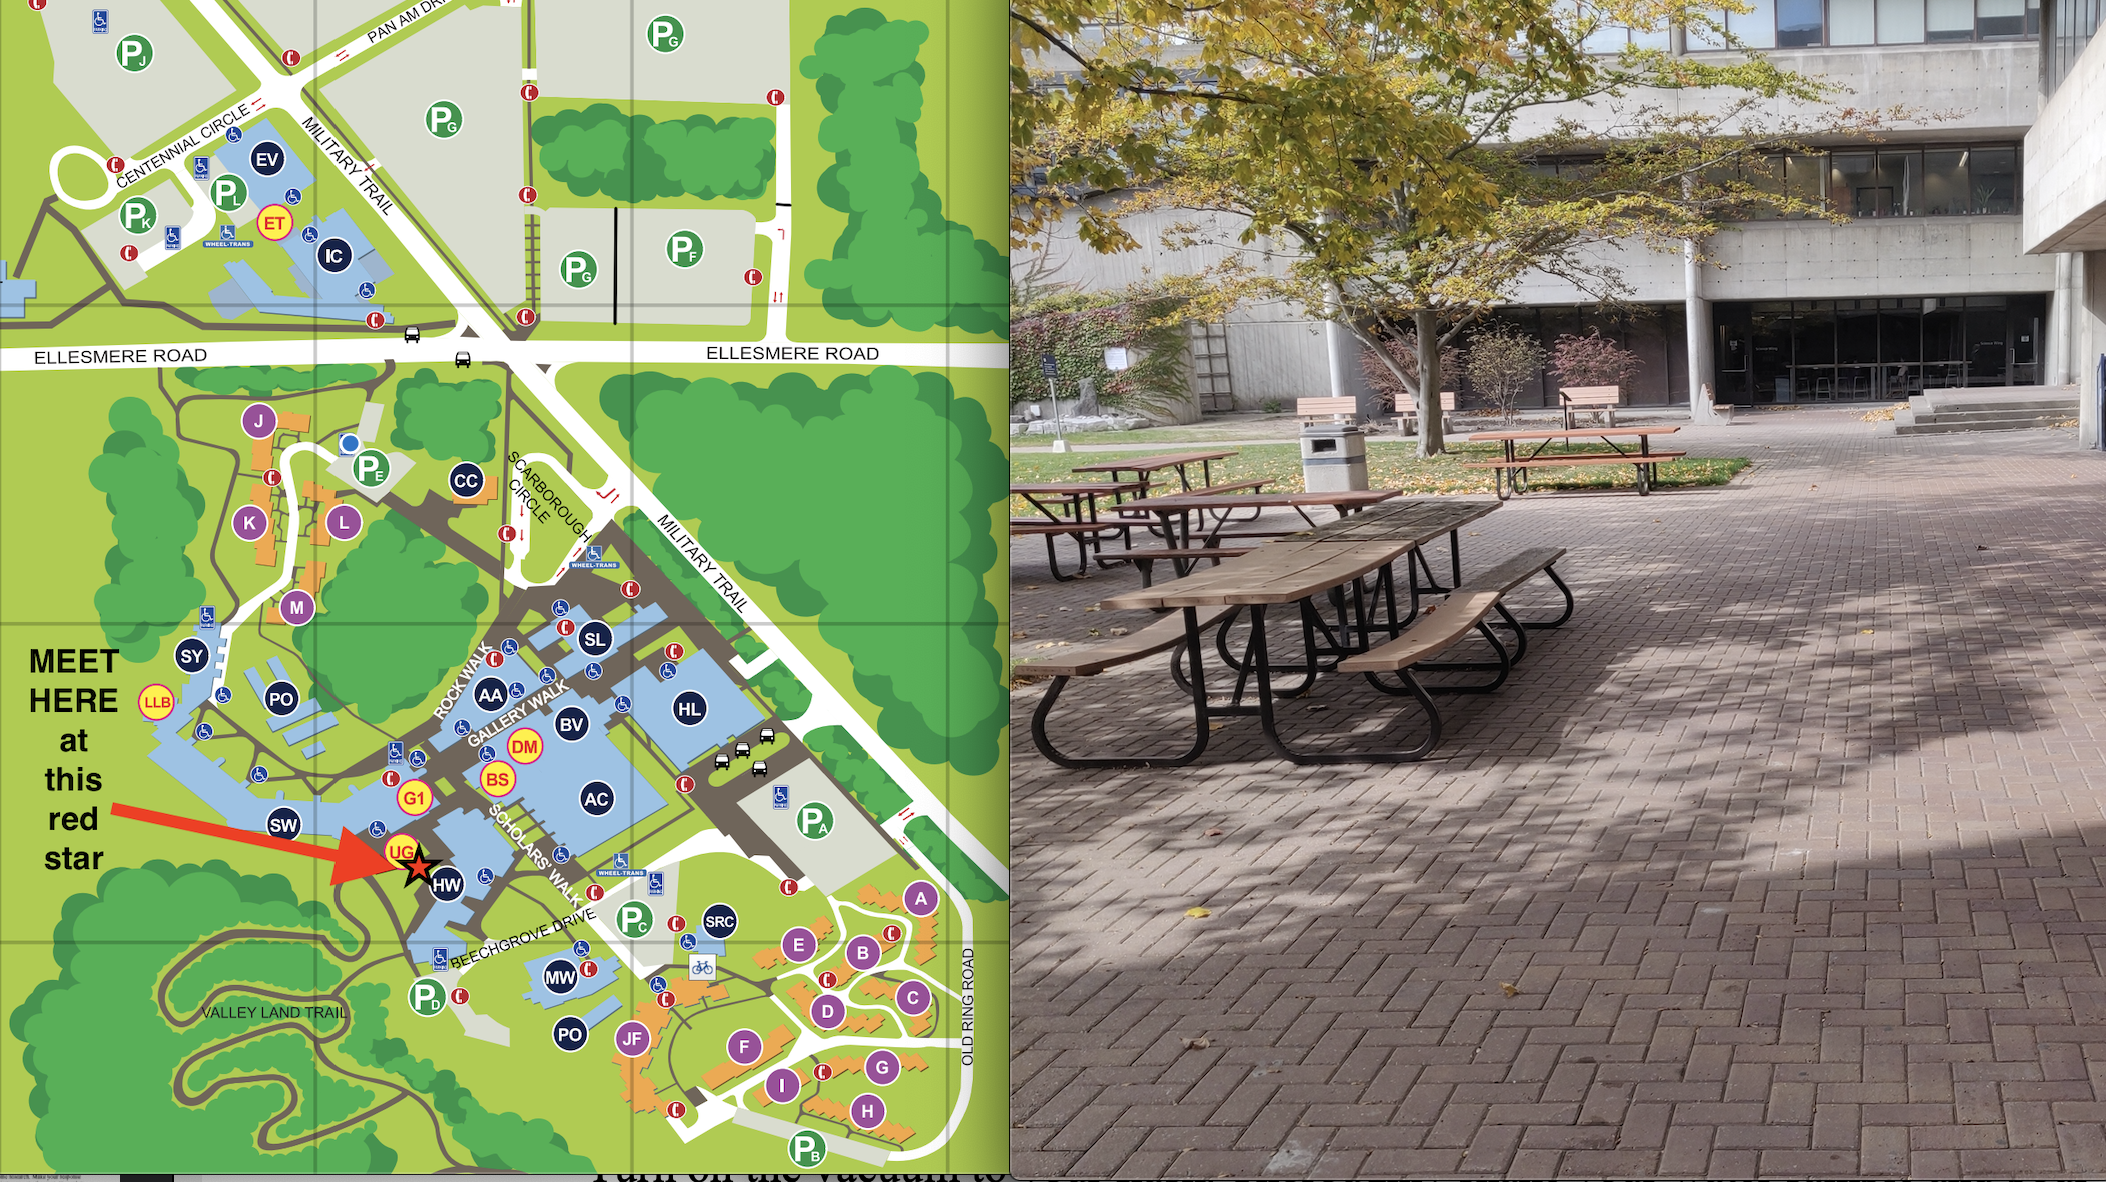 Left: Map of [UTSC](https://www.utsc.utoronto.ca/home/sites/utsc.utoronto.ca.home/files/docs/UTSC_Campus_Map_2015.pdf). Right: Picture of H-Wing patio (Photo taken by Andrew Apostoli).